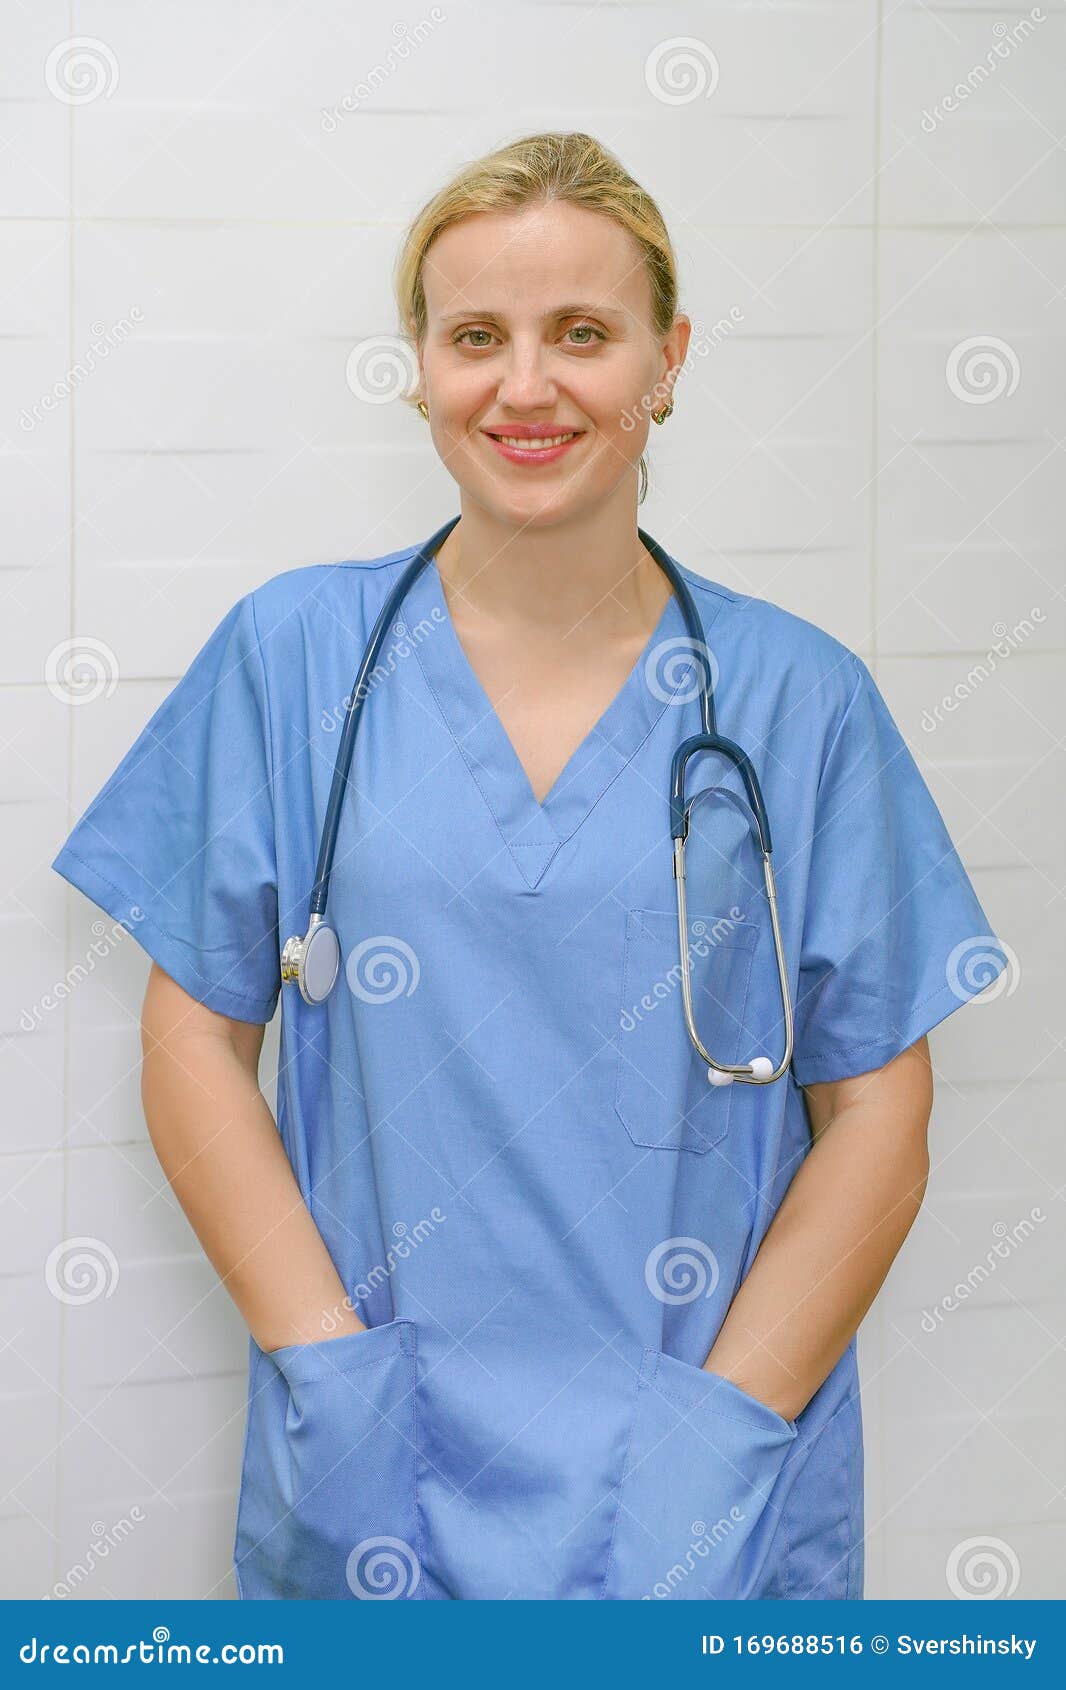 A Nurse with Blond Hair and a Stethoscope in Uniform is Smiling at the ...